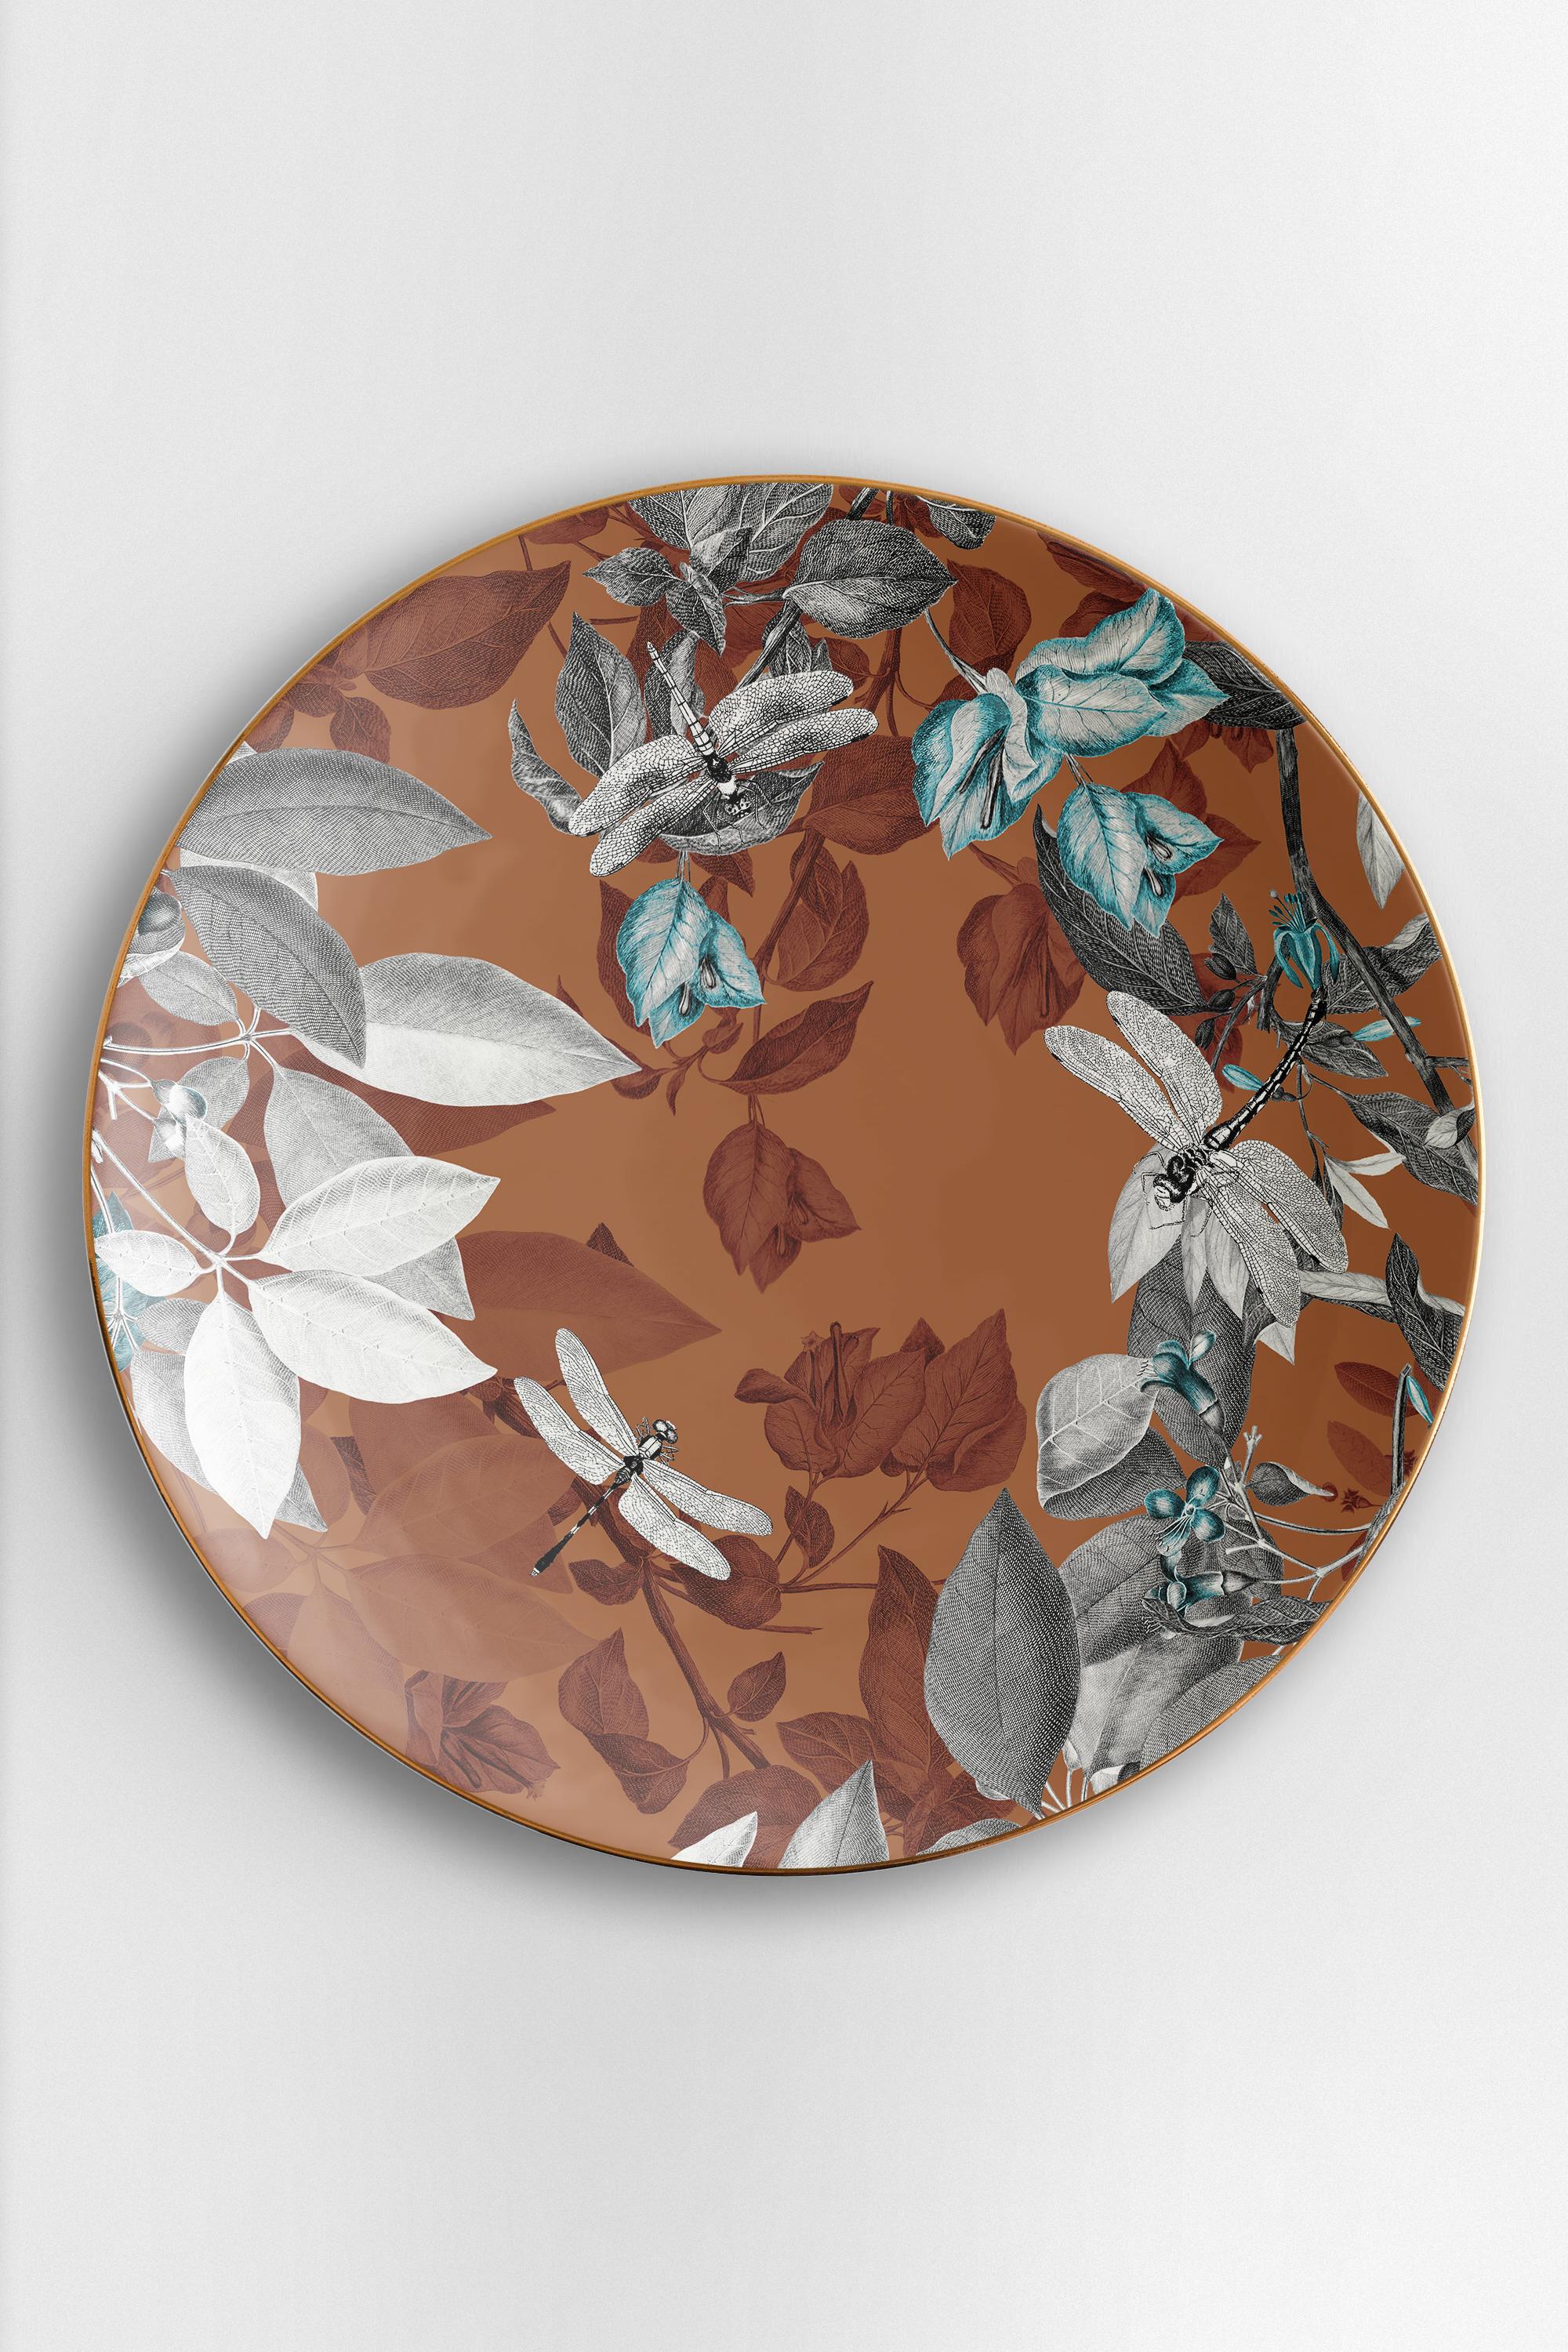 Black dragon POOL is a collection of plates and vases inspired by the famous Chinese pond of the same name, located in the scenic Jade Spring Park. The designs in this collection feature dragonflies drawn in black and white flying and resting on a